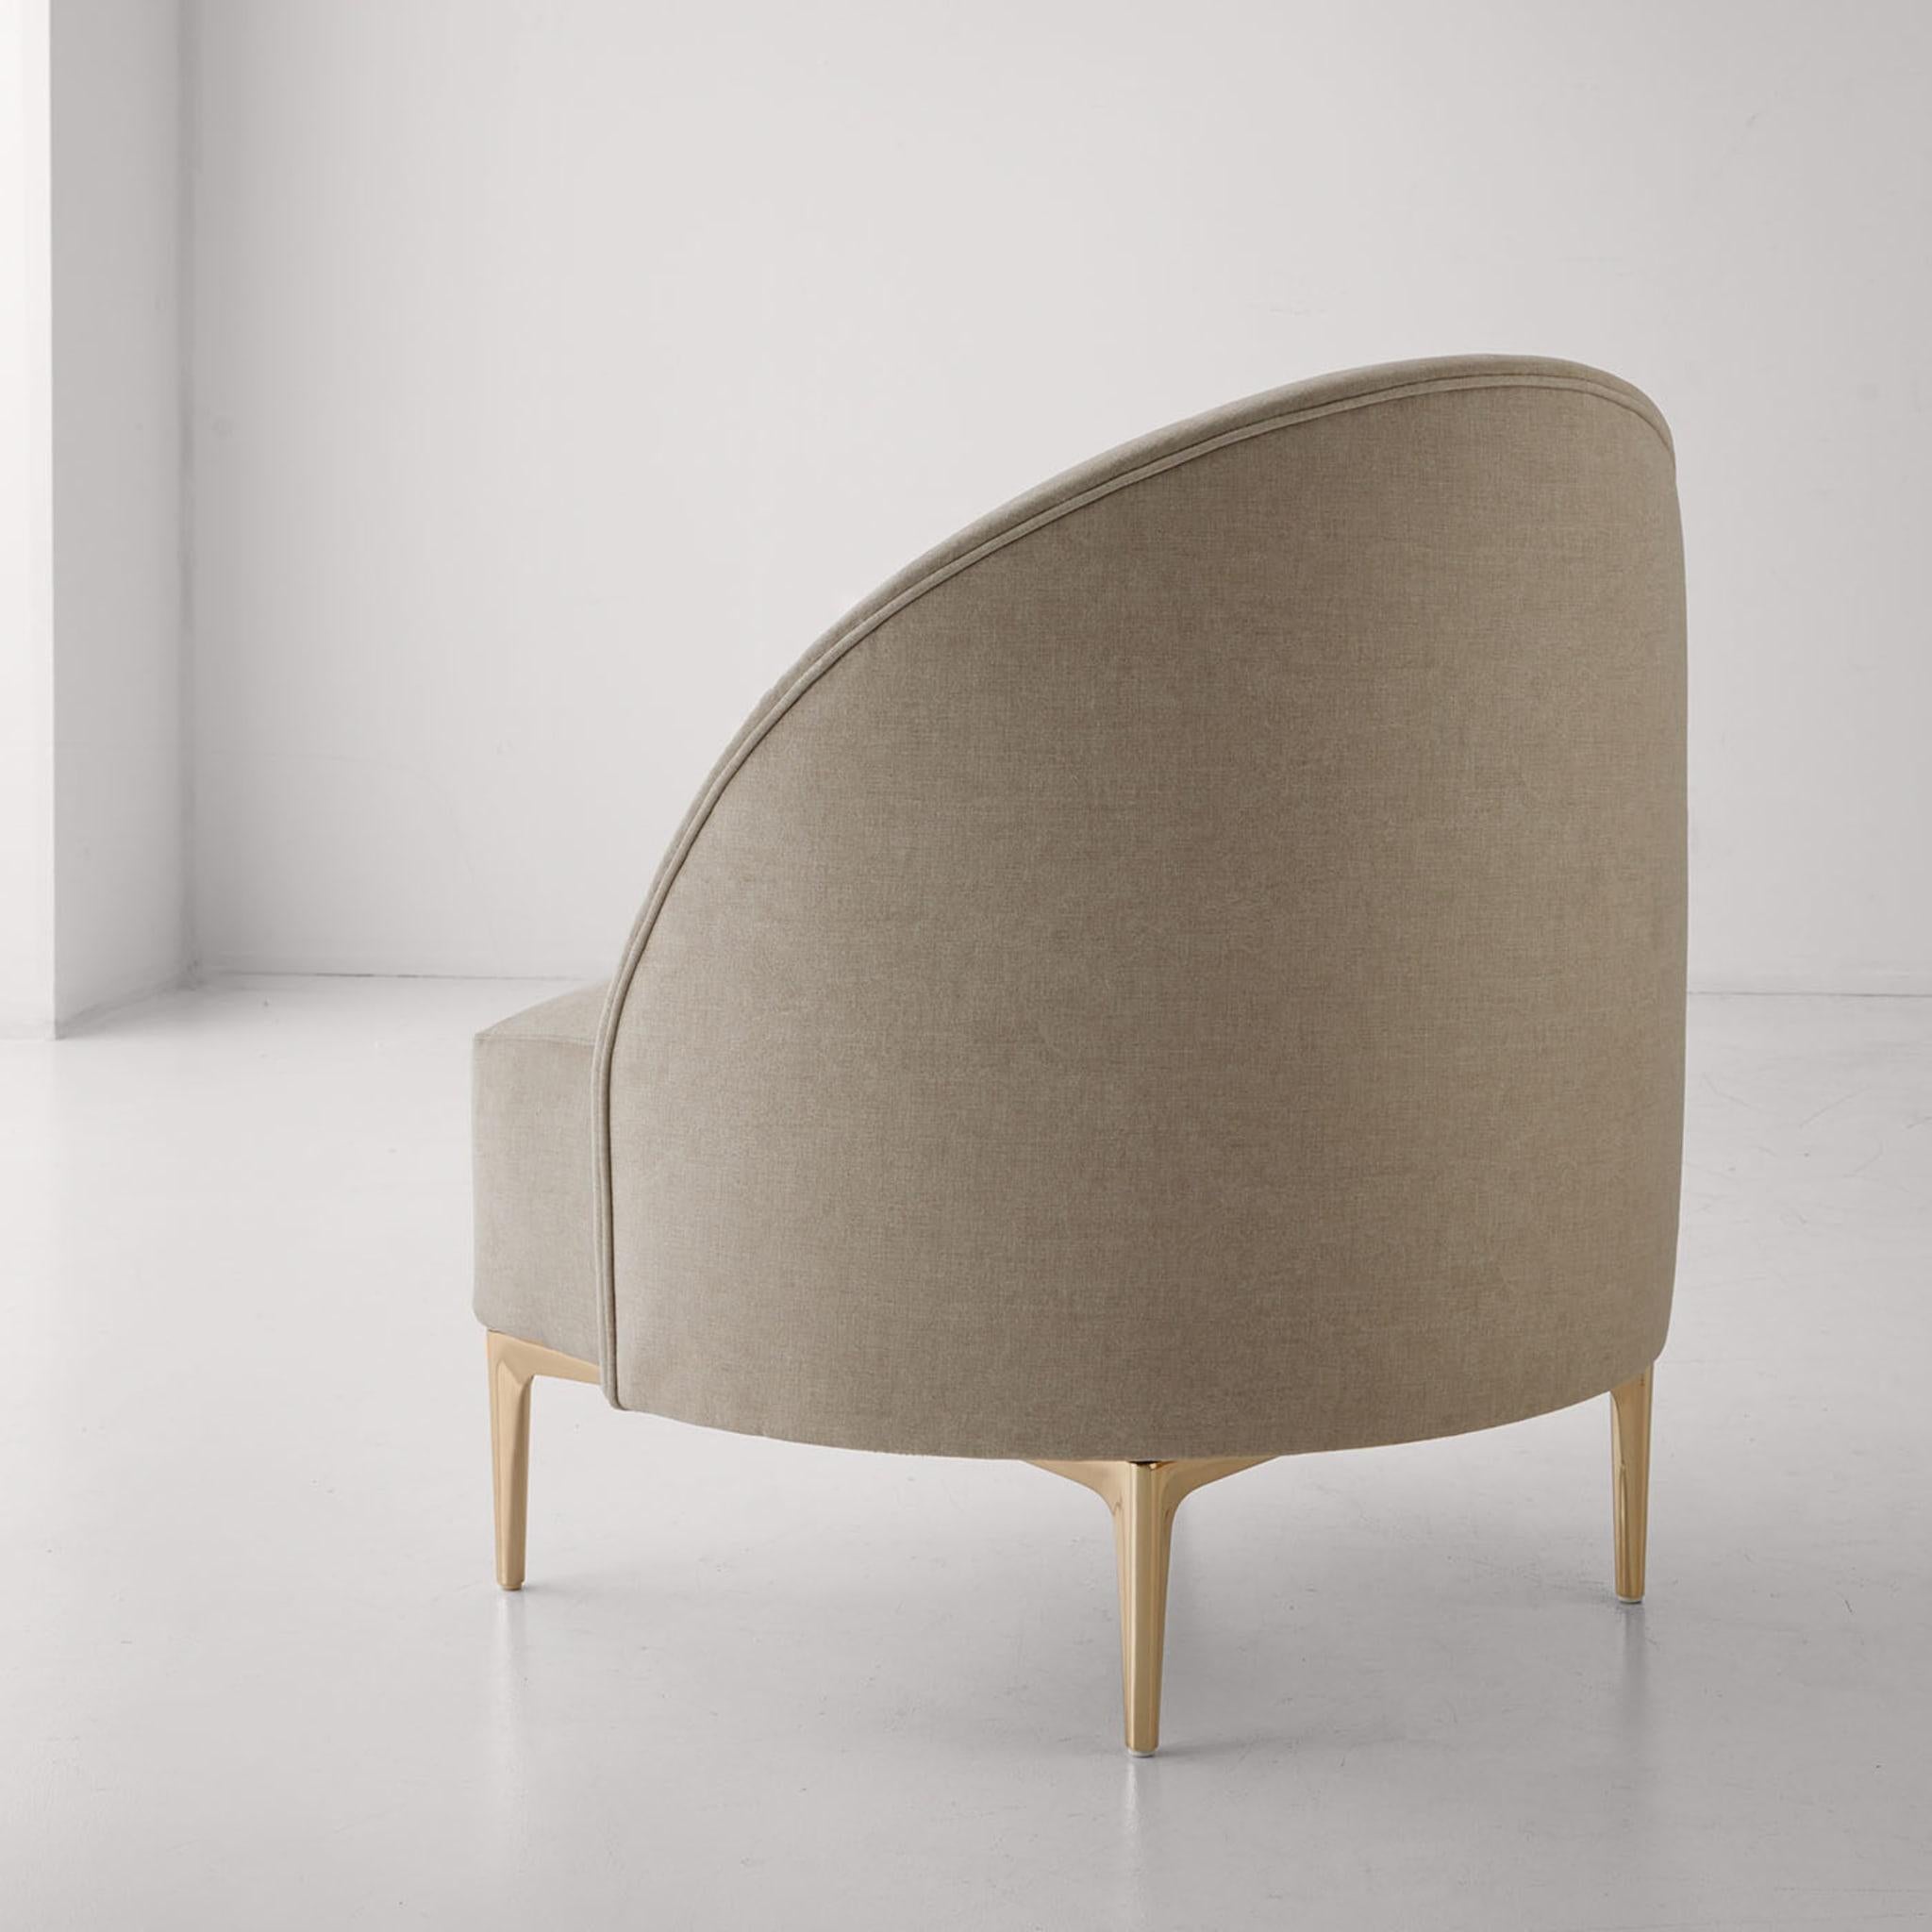 Audrie lounge chair upholstered in velvet and gold metal legs.